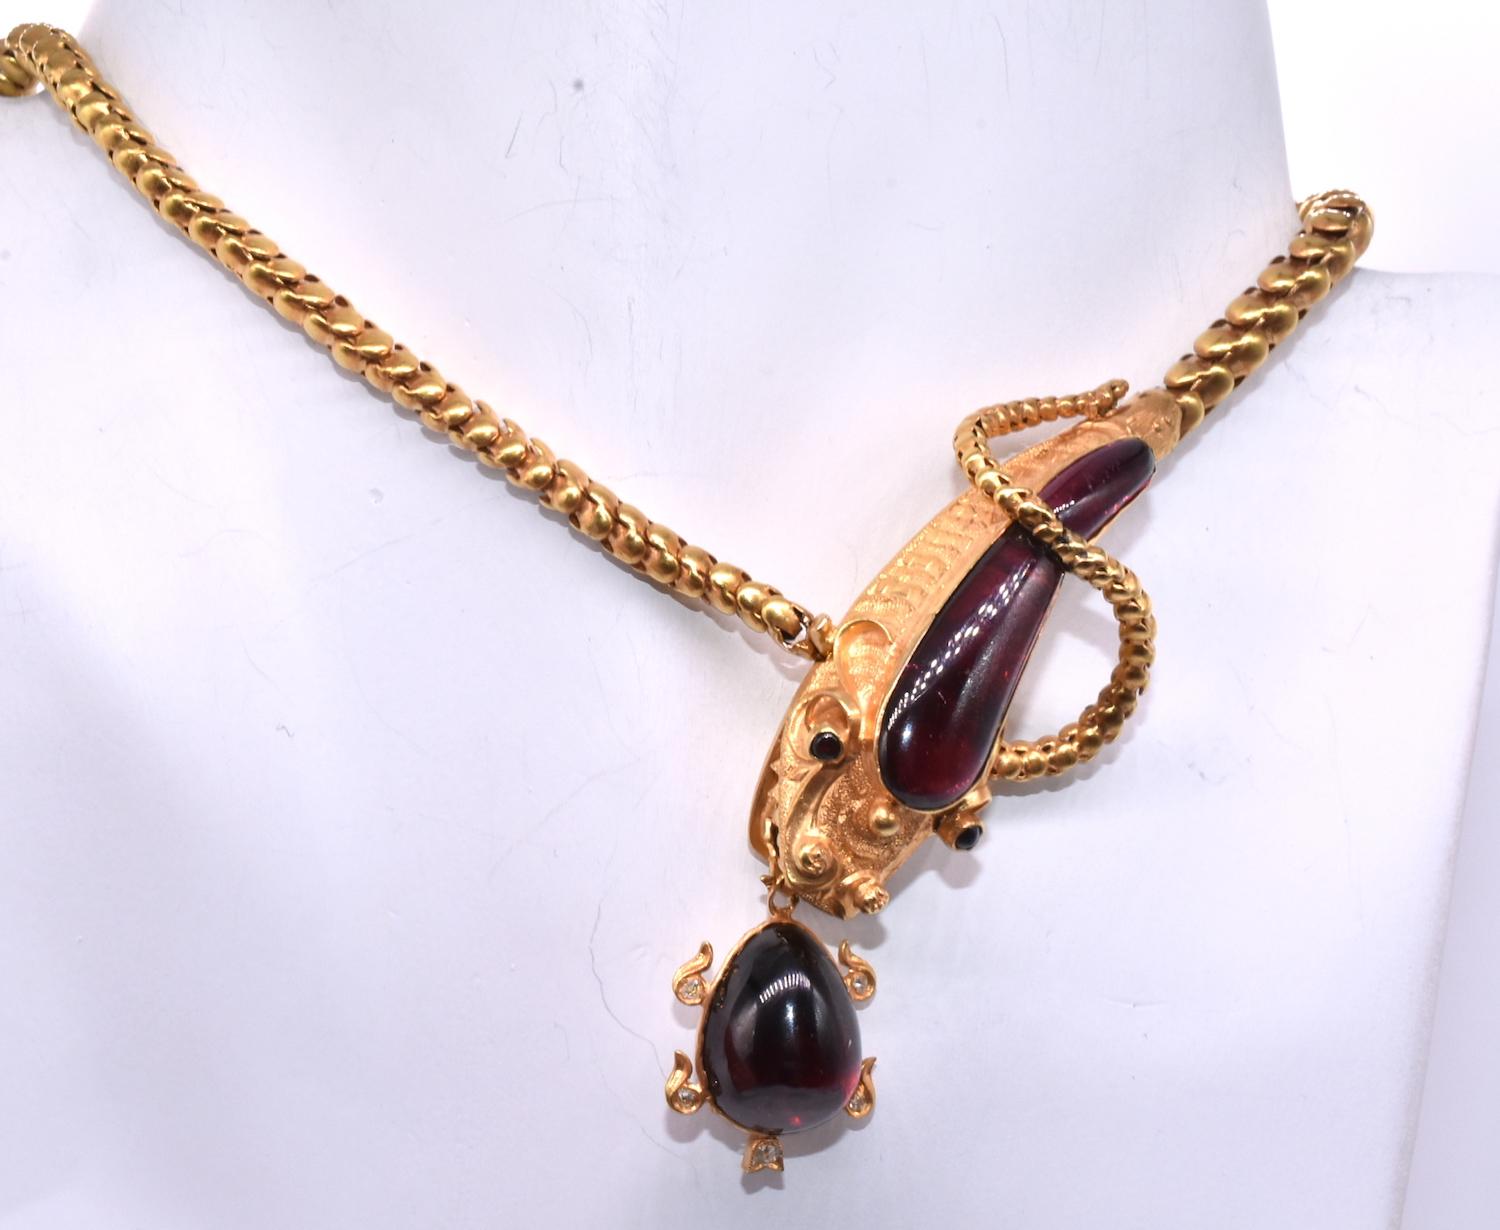 The detail on this fabulous 18K serpent choker astounds. In forty years of buying and selling antique jewelry, we have never seen a necklace like this one, designed with incredible precision and charm. The necklace features a serpent's head with